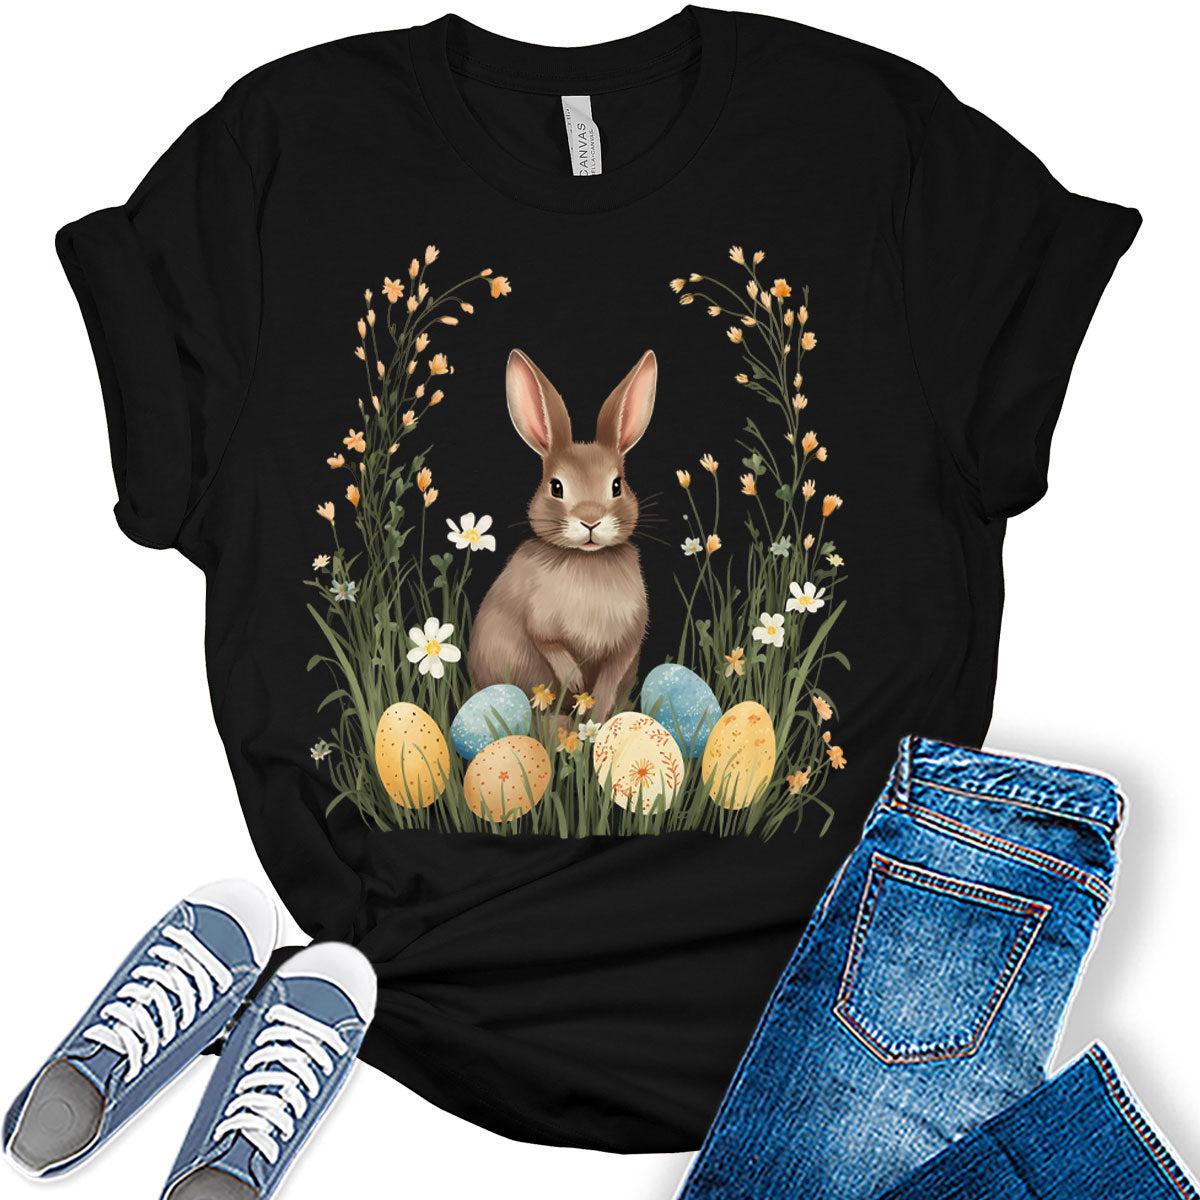 Easter Bunny Shirts For Women Short Sleeve Plus Size Tops